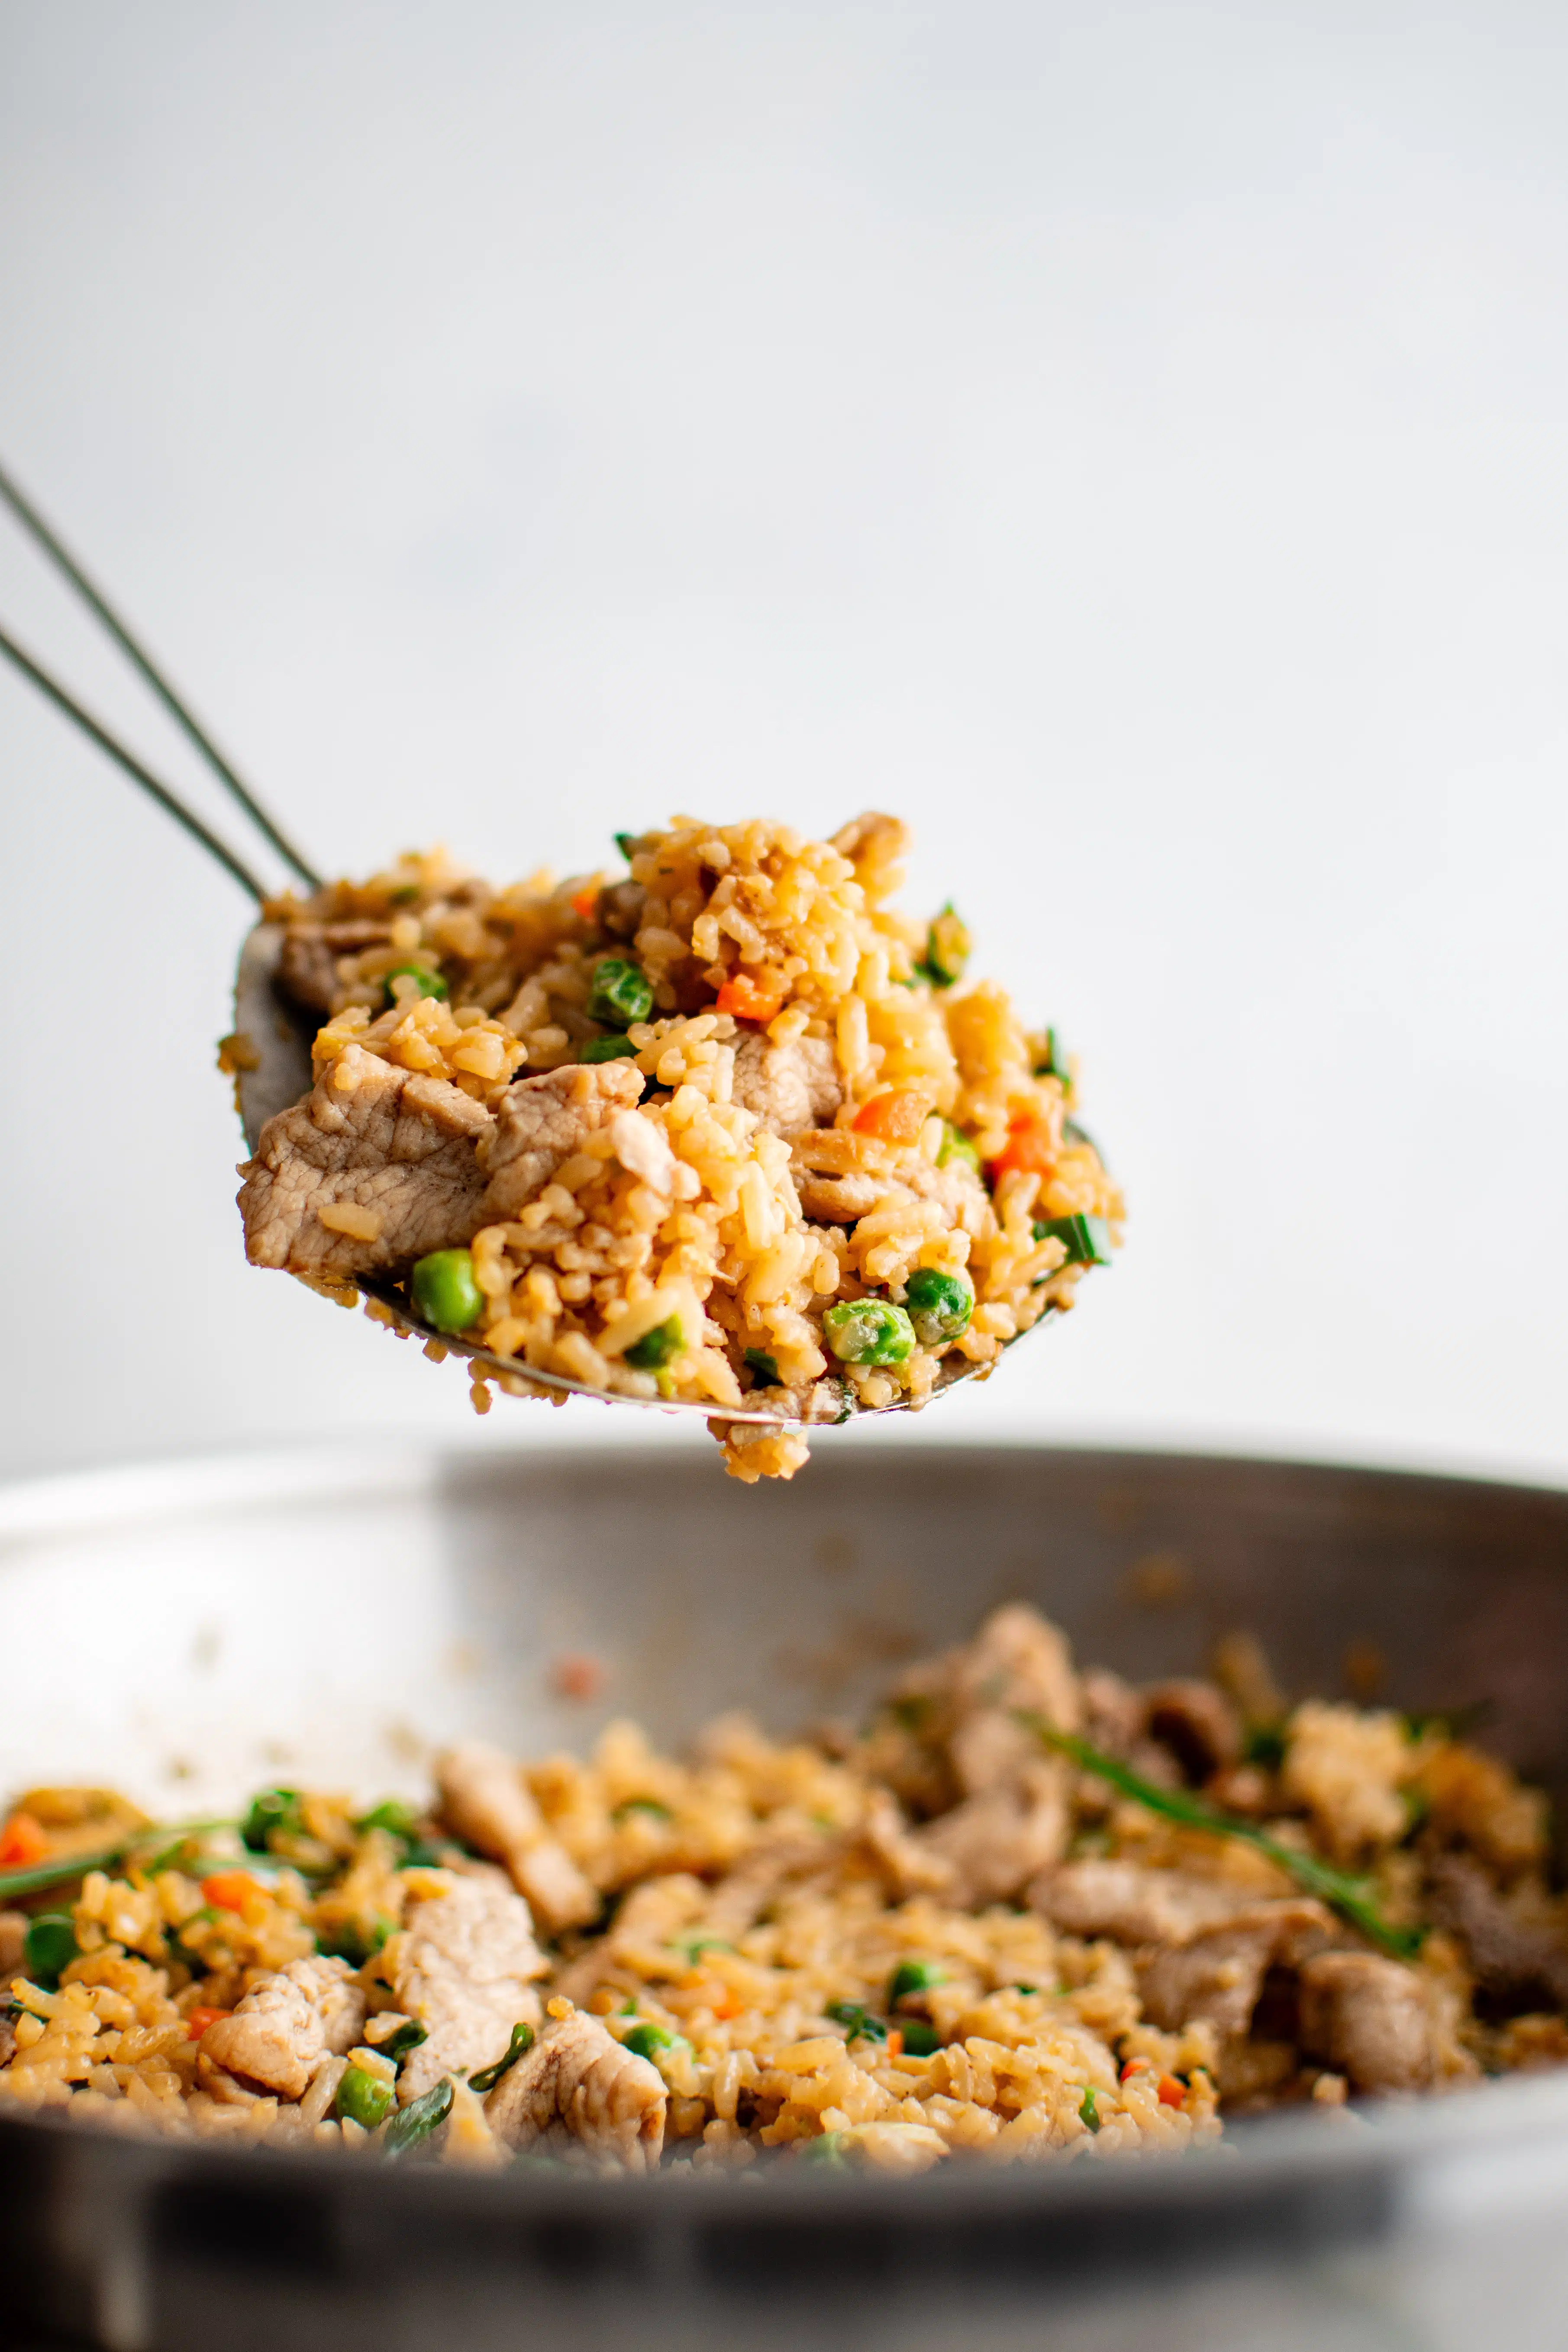 Large stainless steel spoon scooping pork fried rice from a large wok that is filled with cooked pork fried rice.